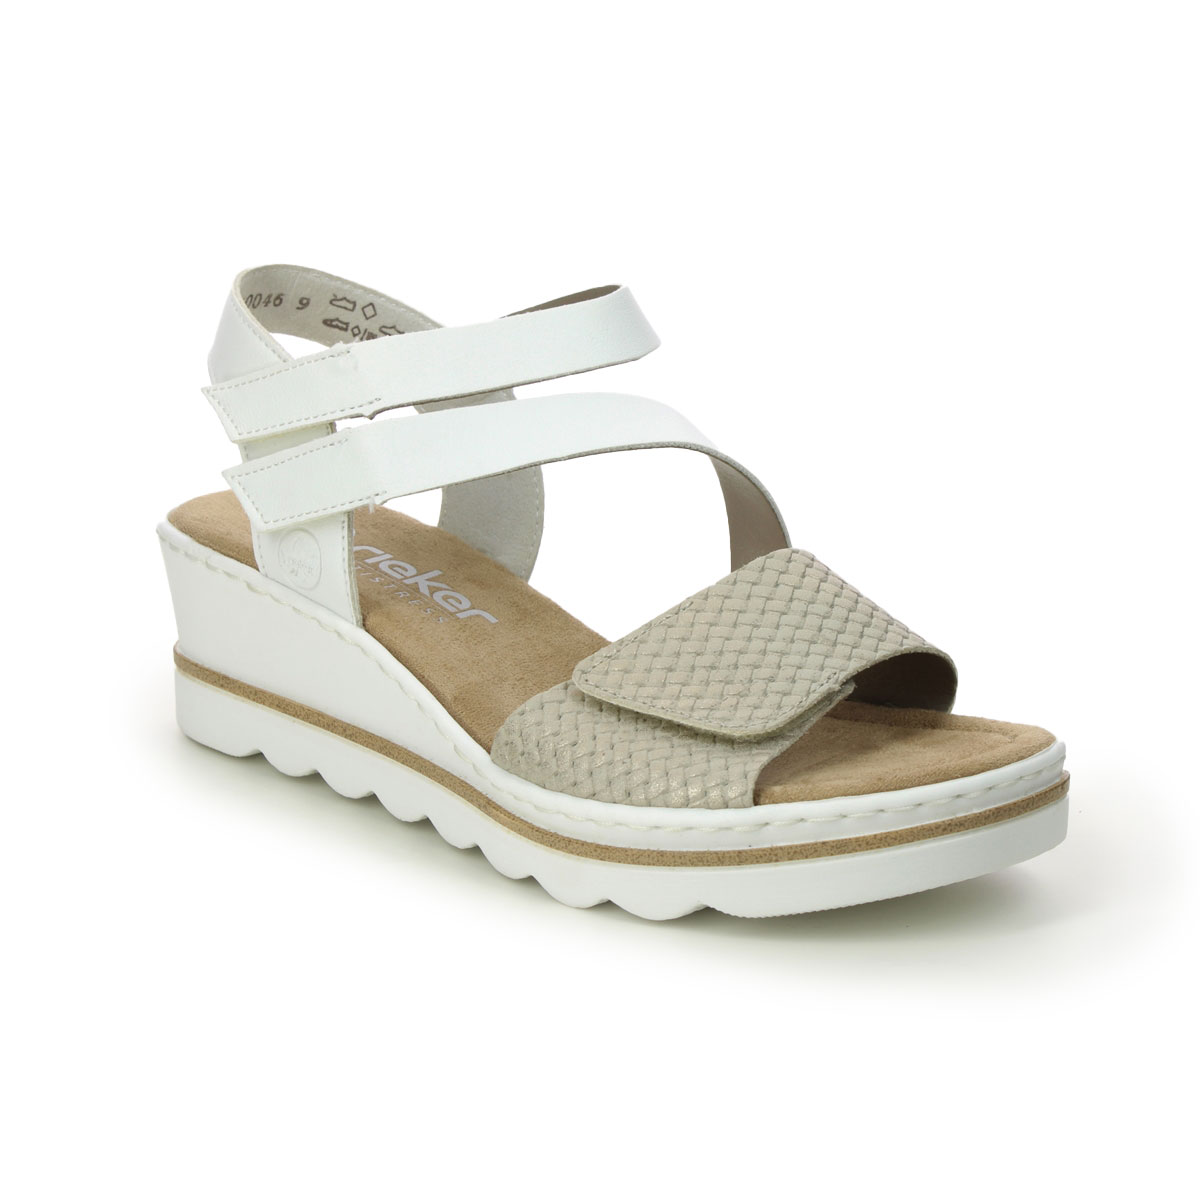 Rieker 67454-80 White Light Gold Womens Wedge Sandals in a Plain Man-made in Size 36